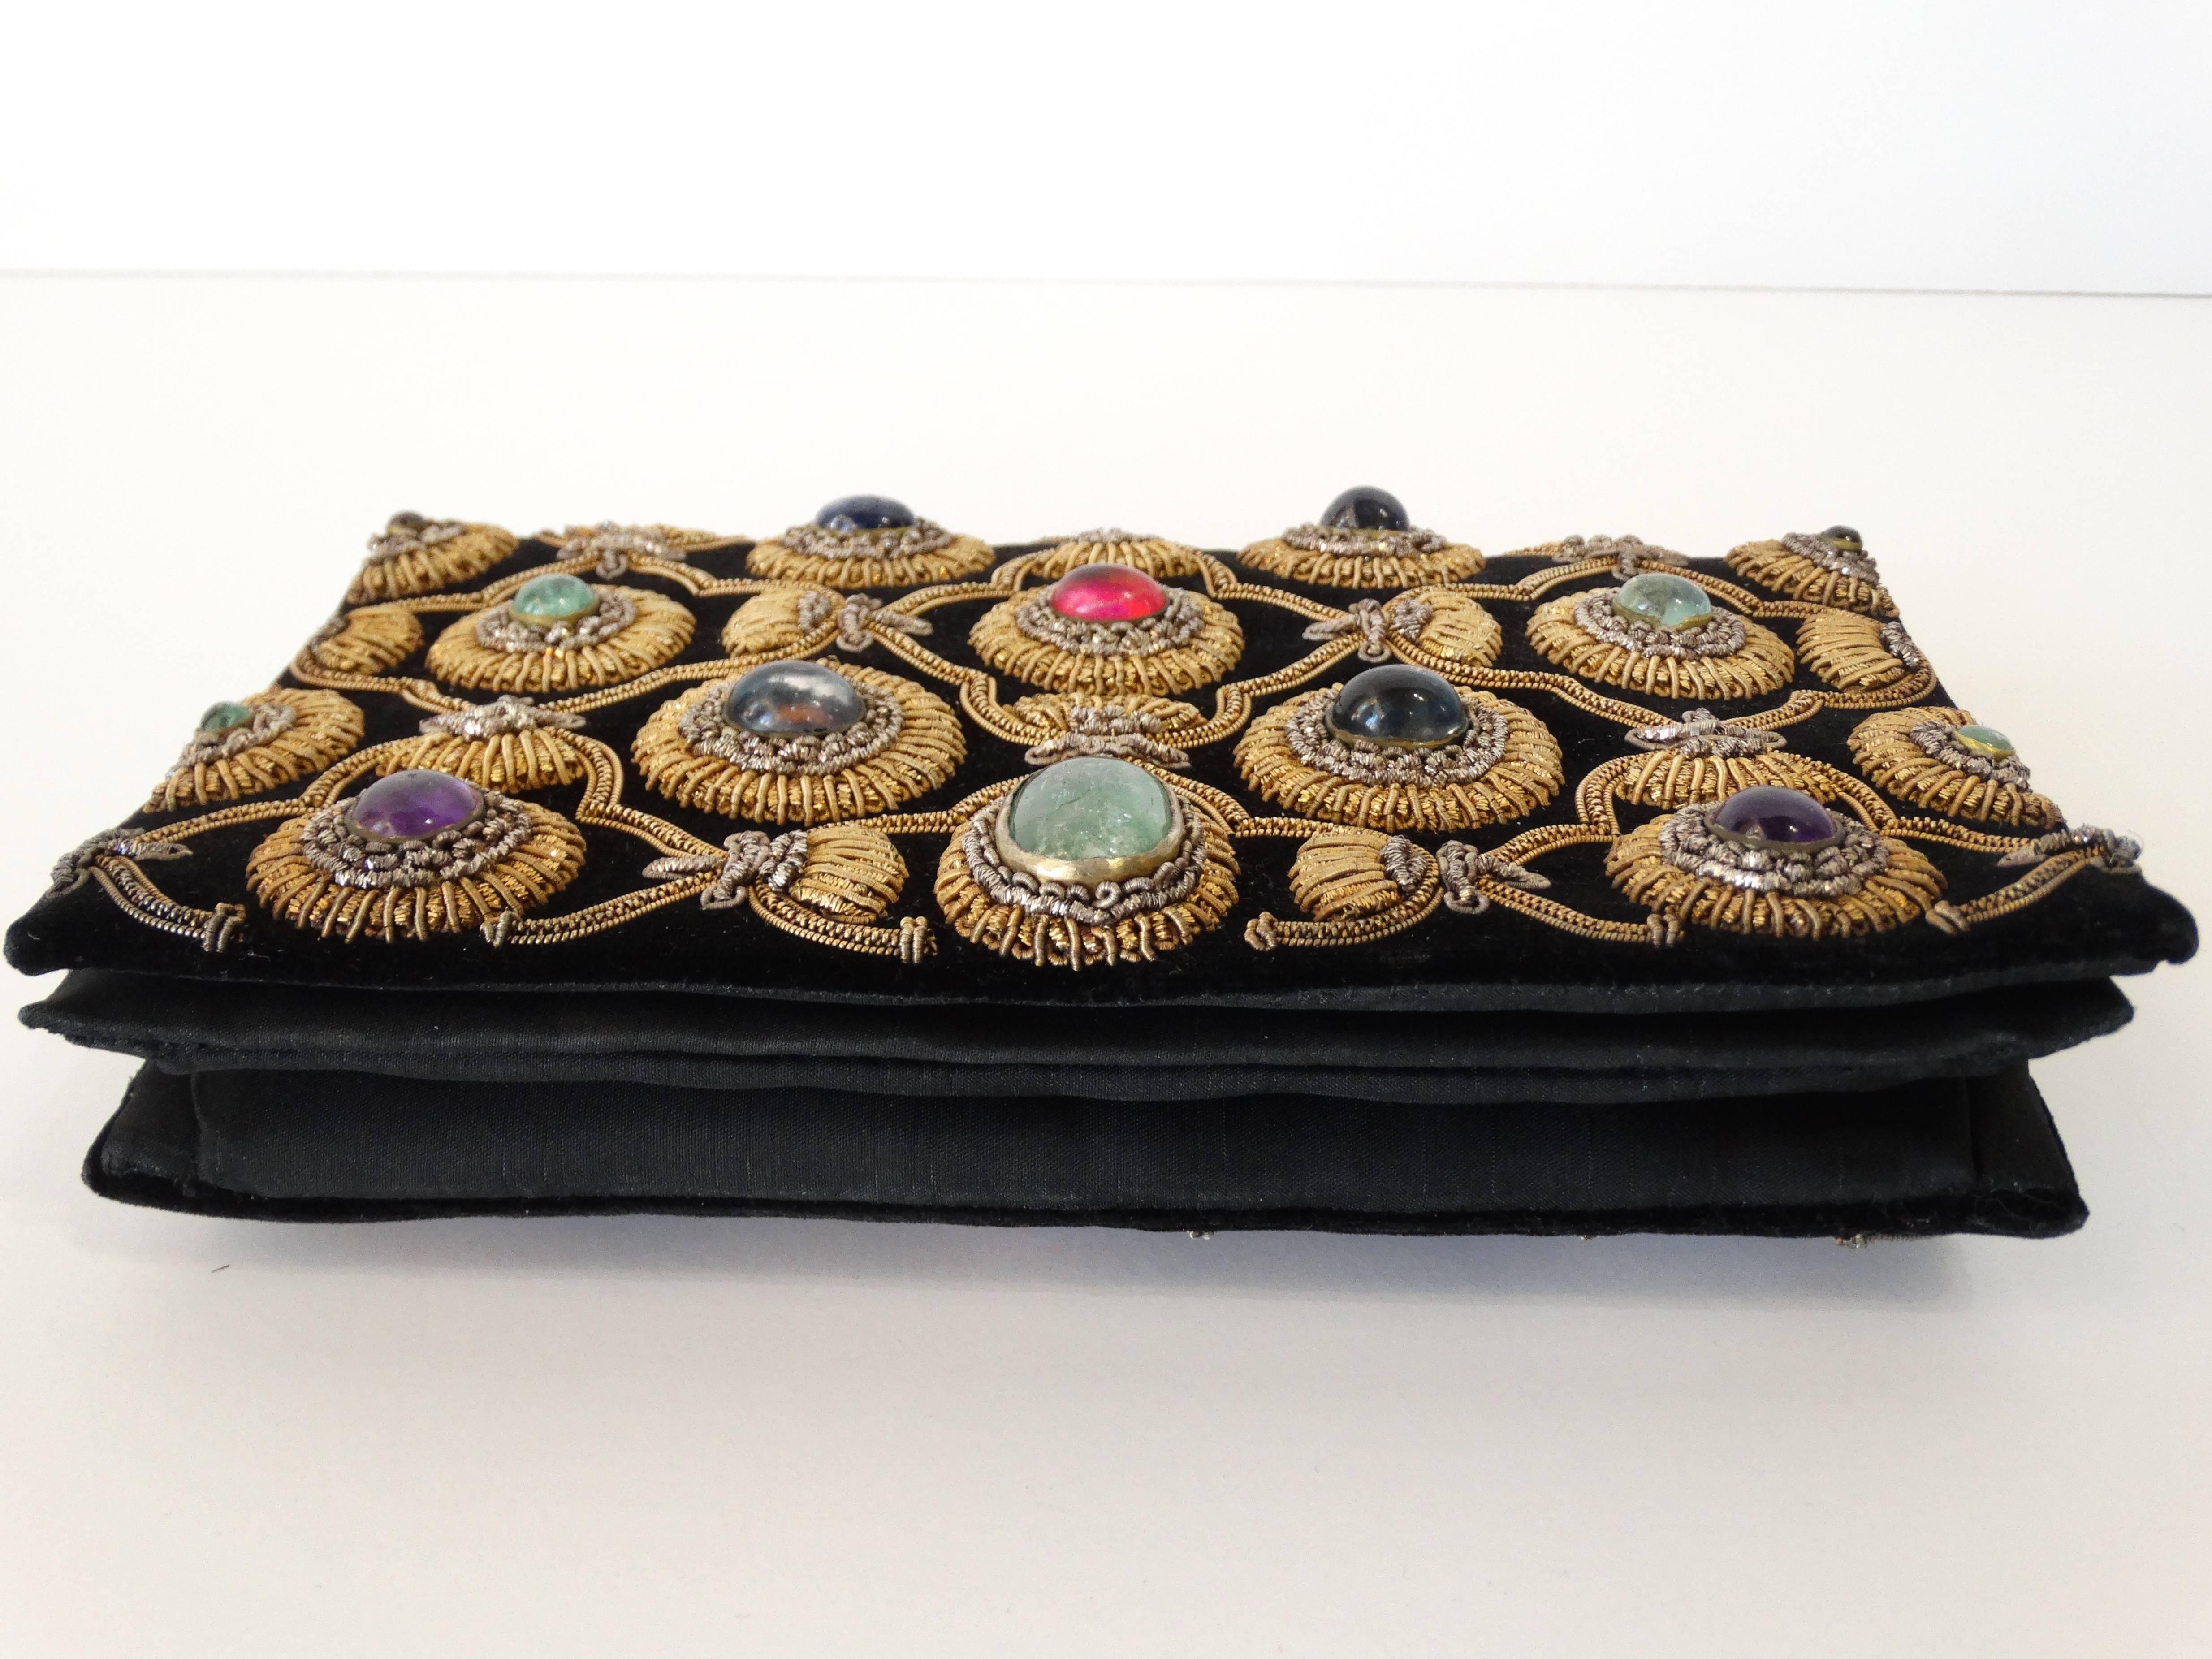 Beautiful 1960's Zardozi Zari gem-set evening handbag attributed to Van Cleef & Arpels from the 1920s The gold textile rectangular bag, embroidered with a quatrefoil lattice design in gold and silver metallic thread, set with amethyst, jade, onyx